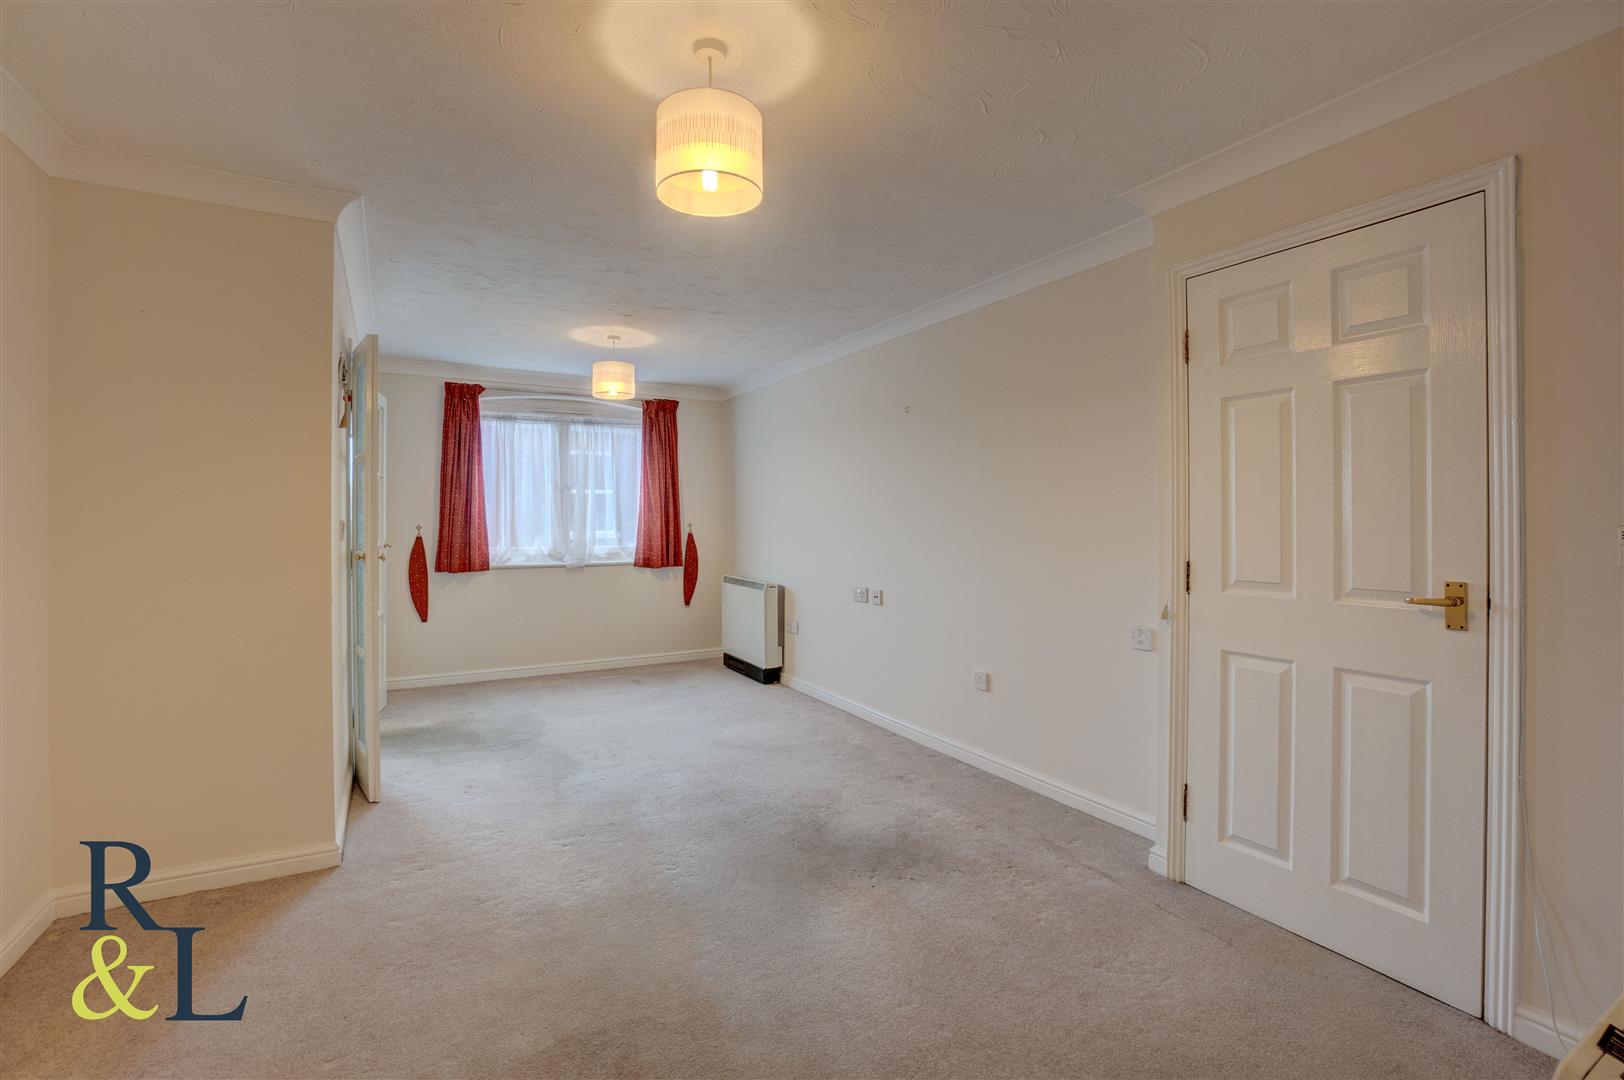 Property image for Giles Court Rectory Road, West Bridgford, Nottingham